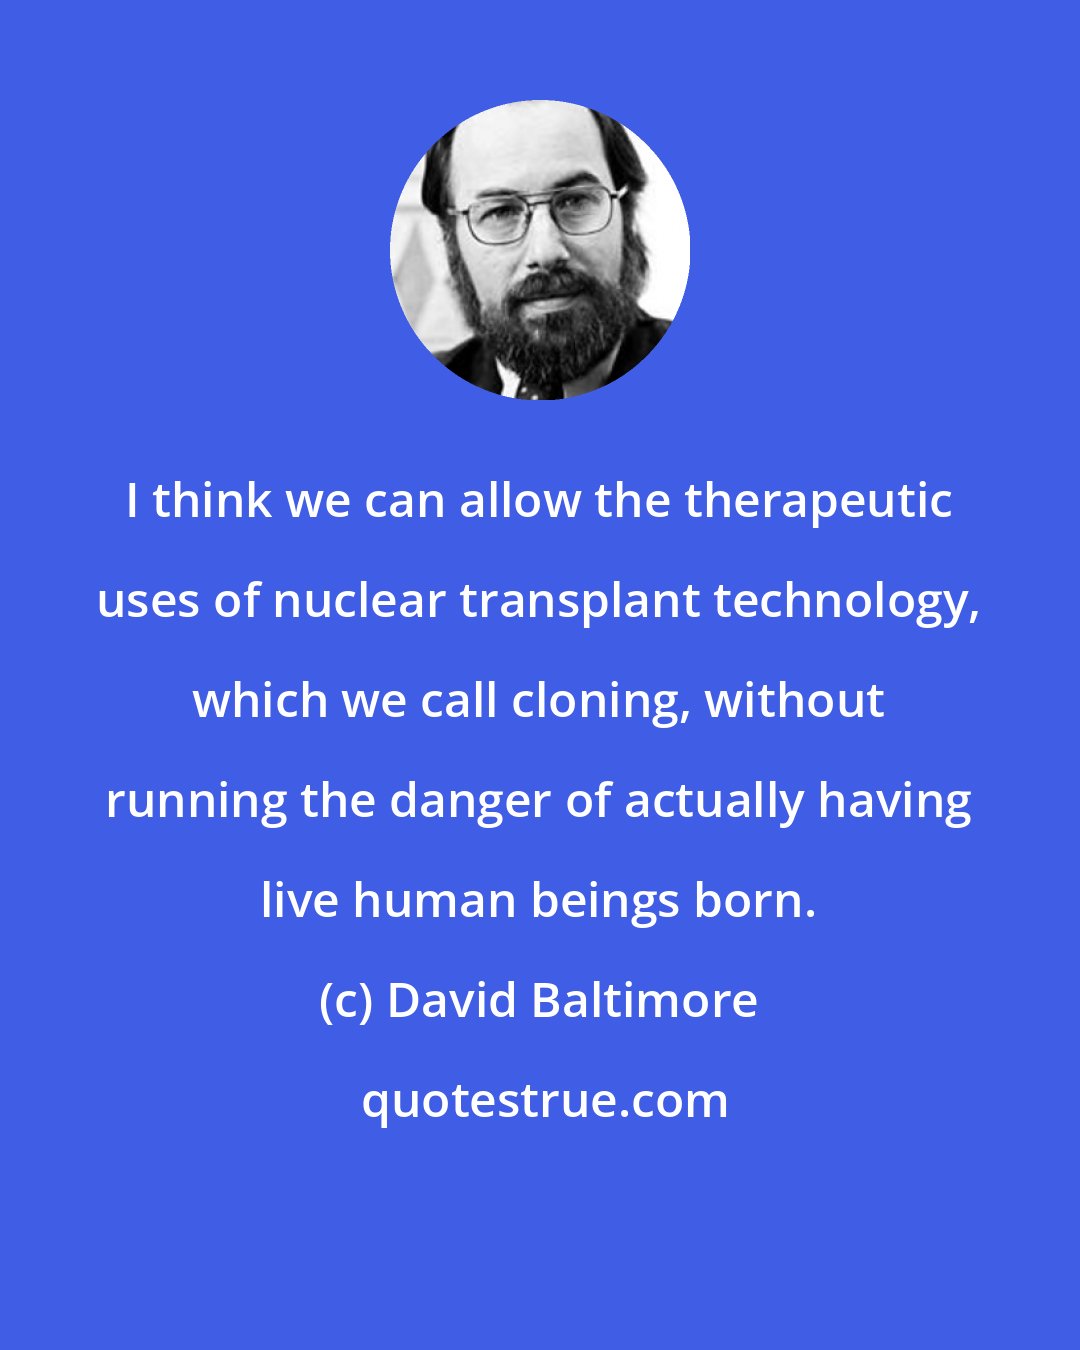 David Baltimore: I think we can allow the therapeutic uses of nuclear transplant technology, which we call cloning, without running the danger of actually having live human beings born.